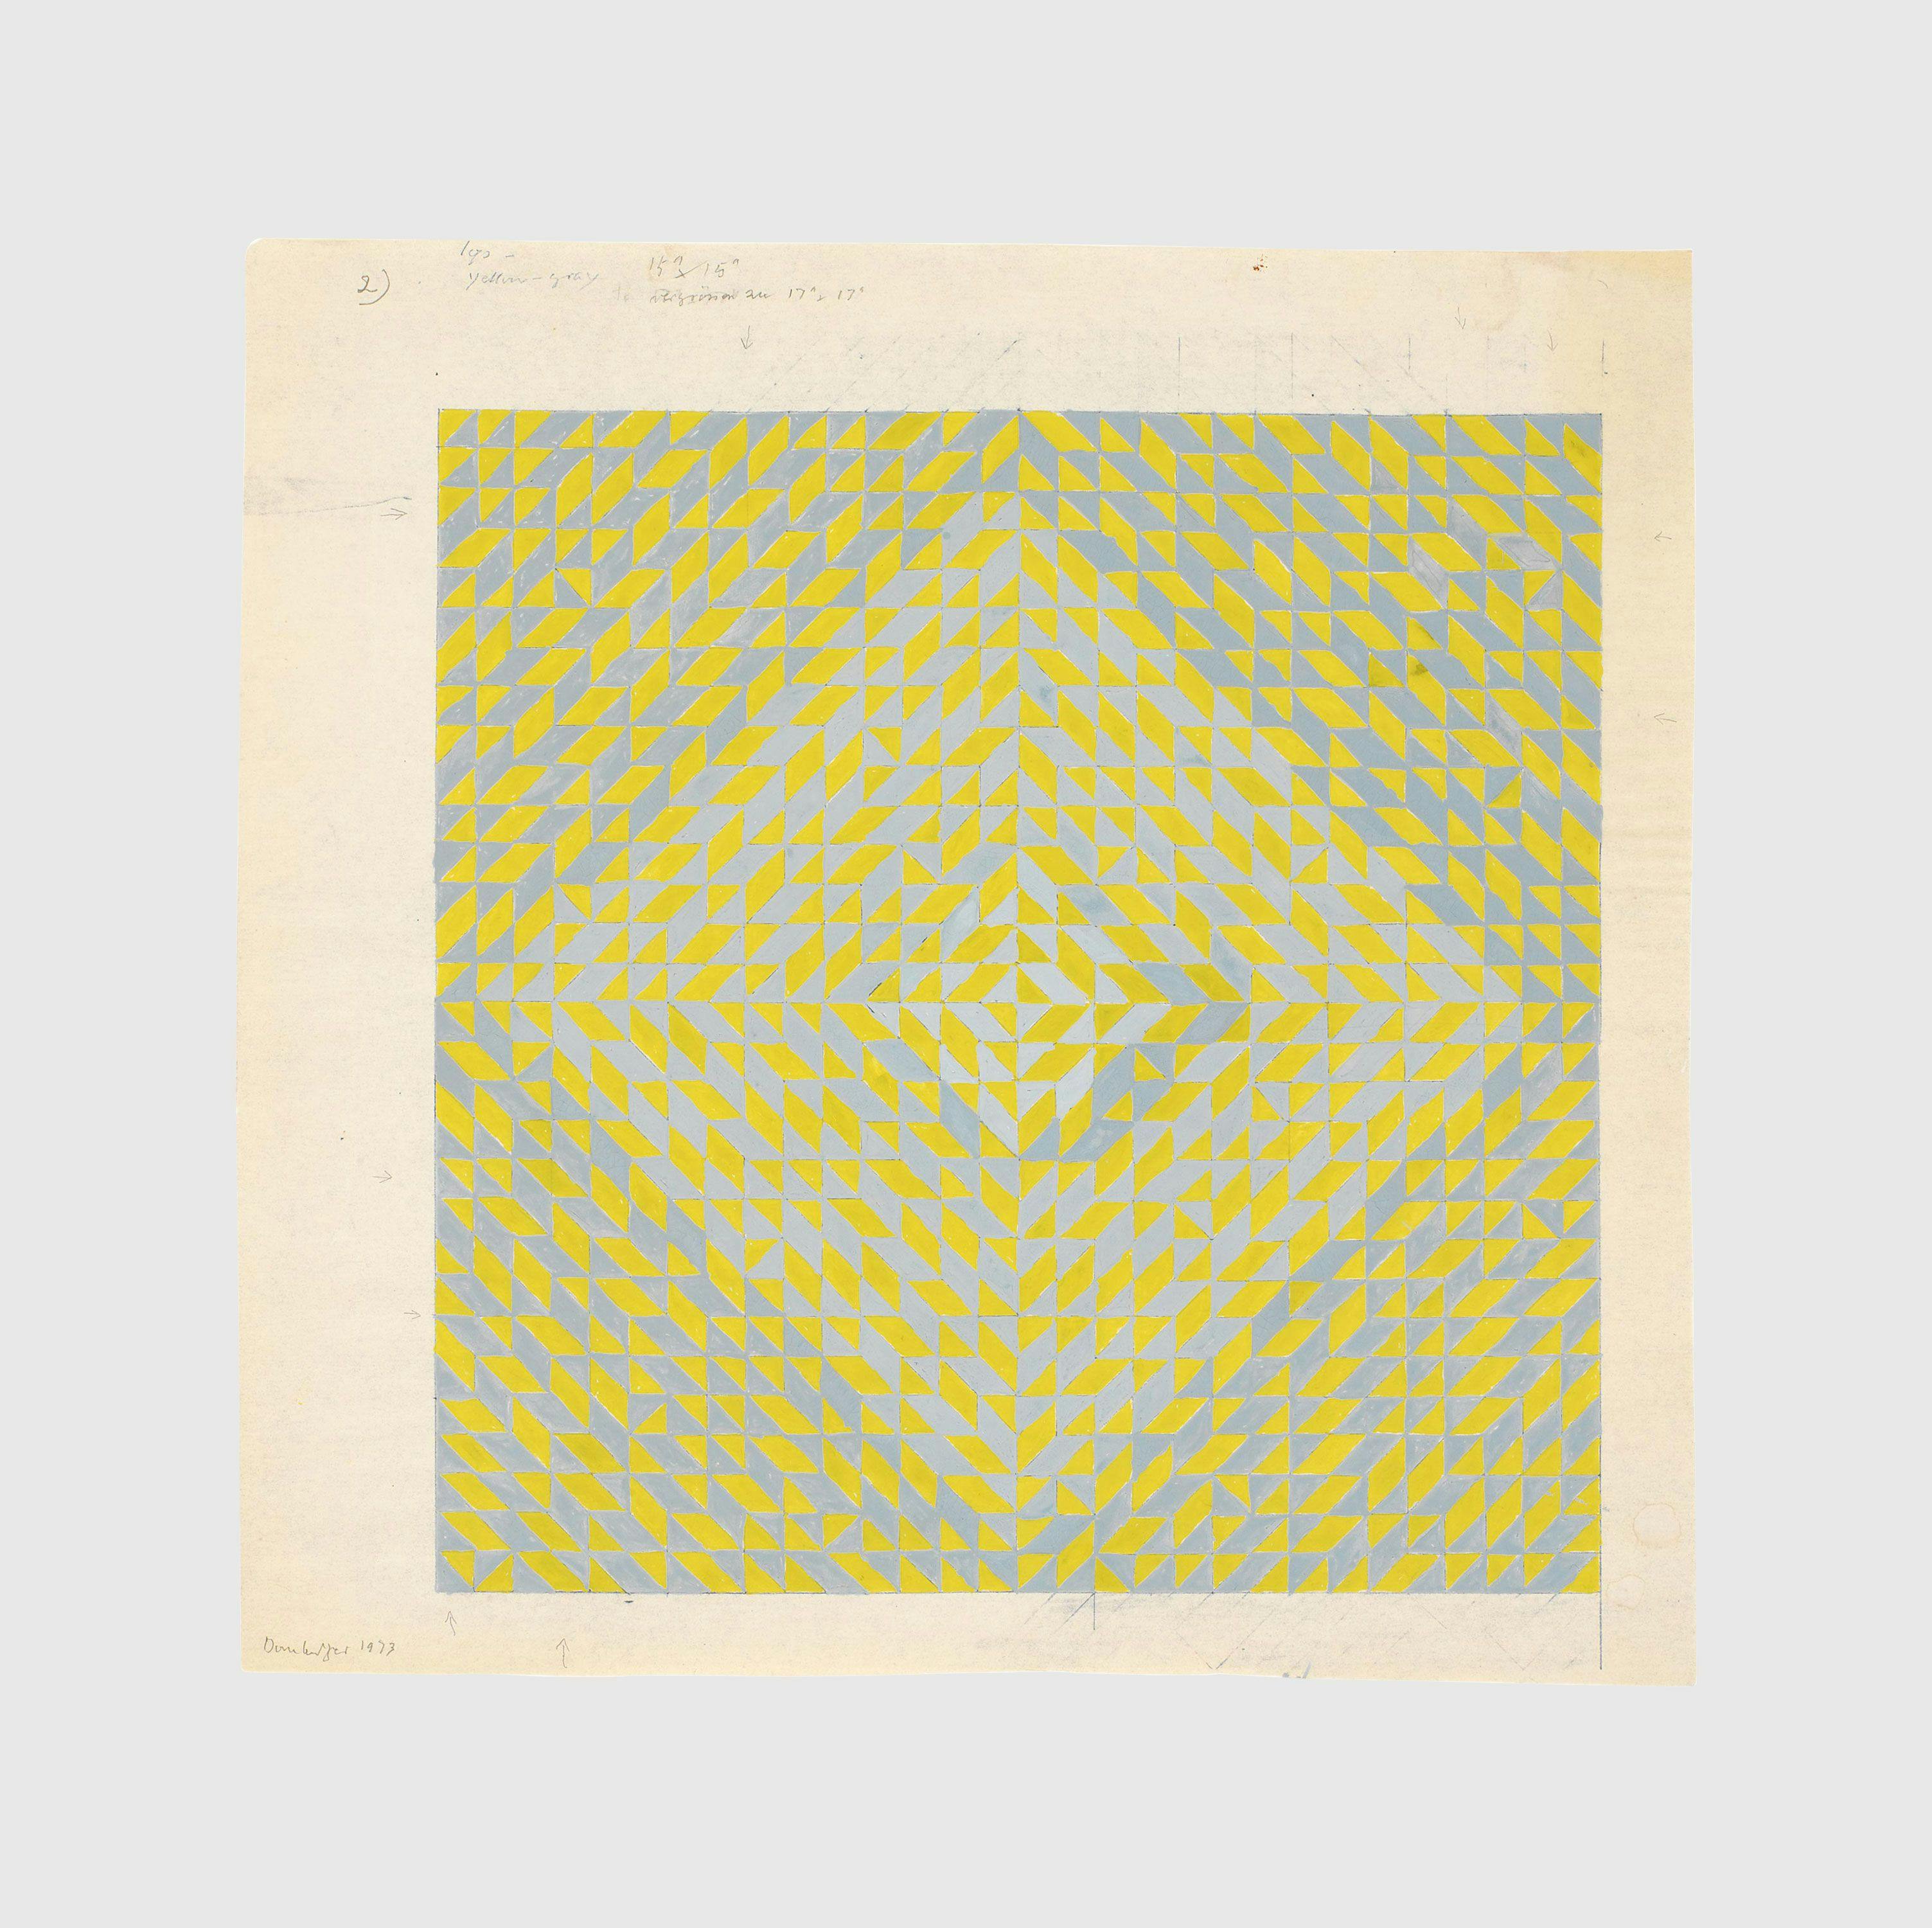 A drawing by Anni Albers, titled Study for DO II, dated 1973.